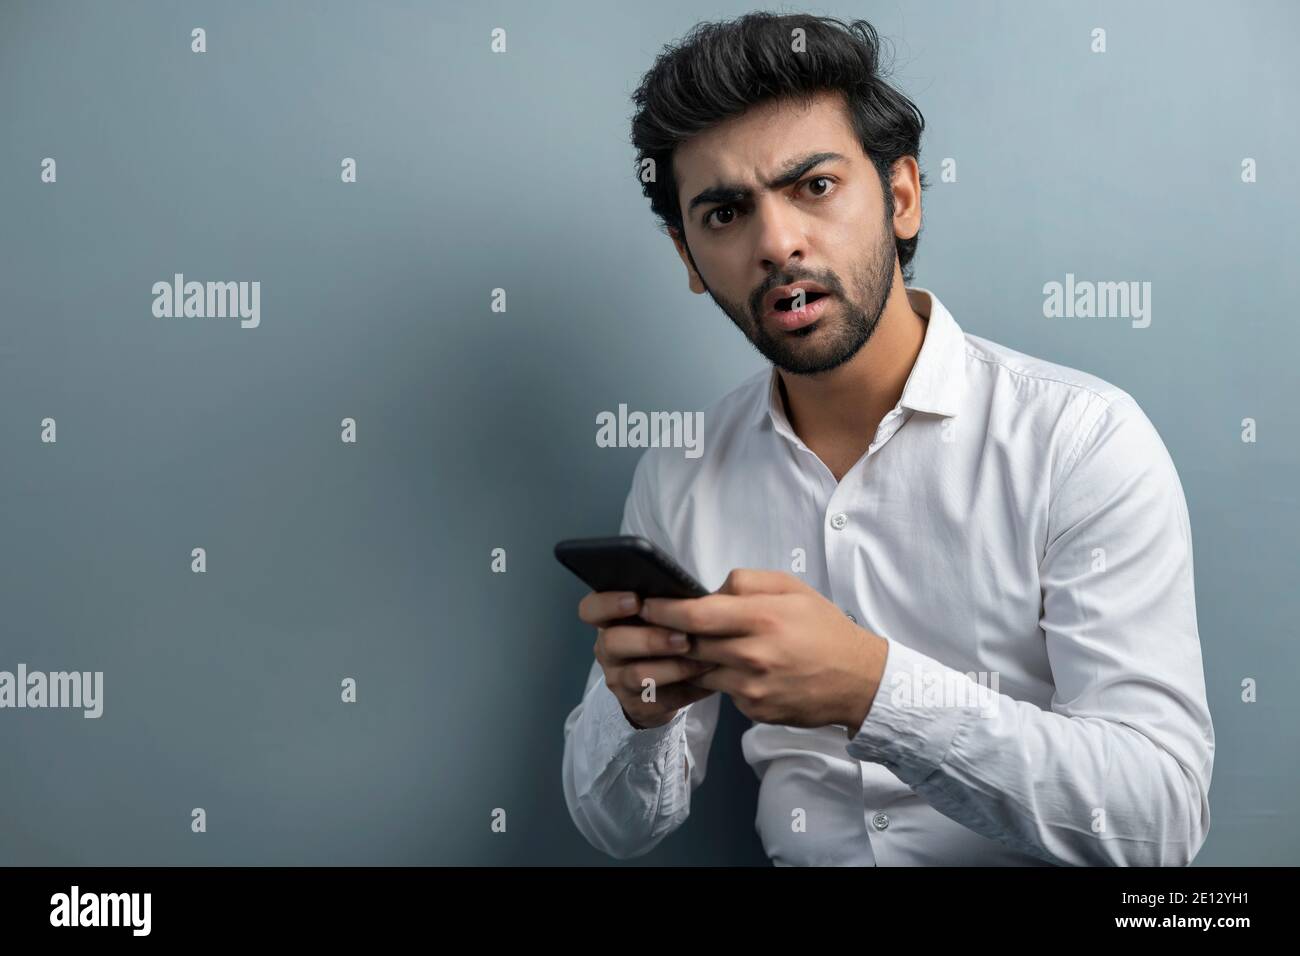 A YOUNG EXECUTIVE LOOKING AT CAMERA AND FEELING SURPRISED WHILE USING MOBILE PHONE Stock Photo